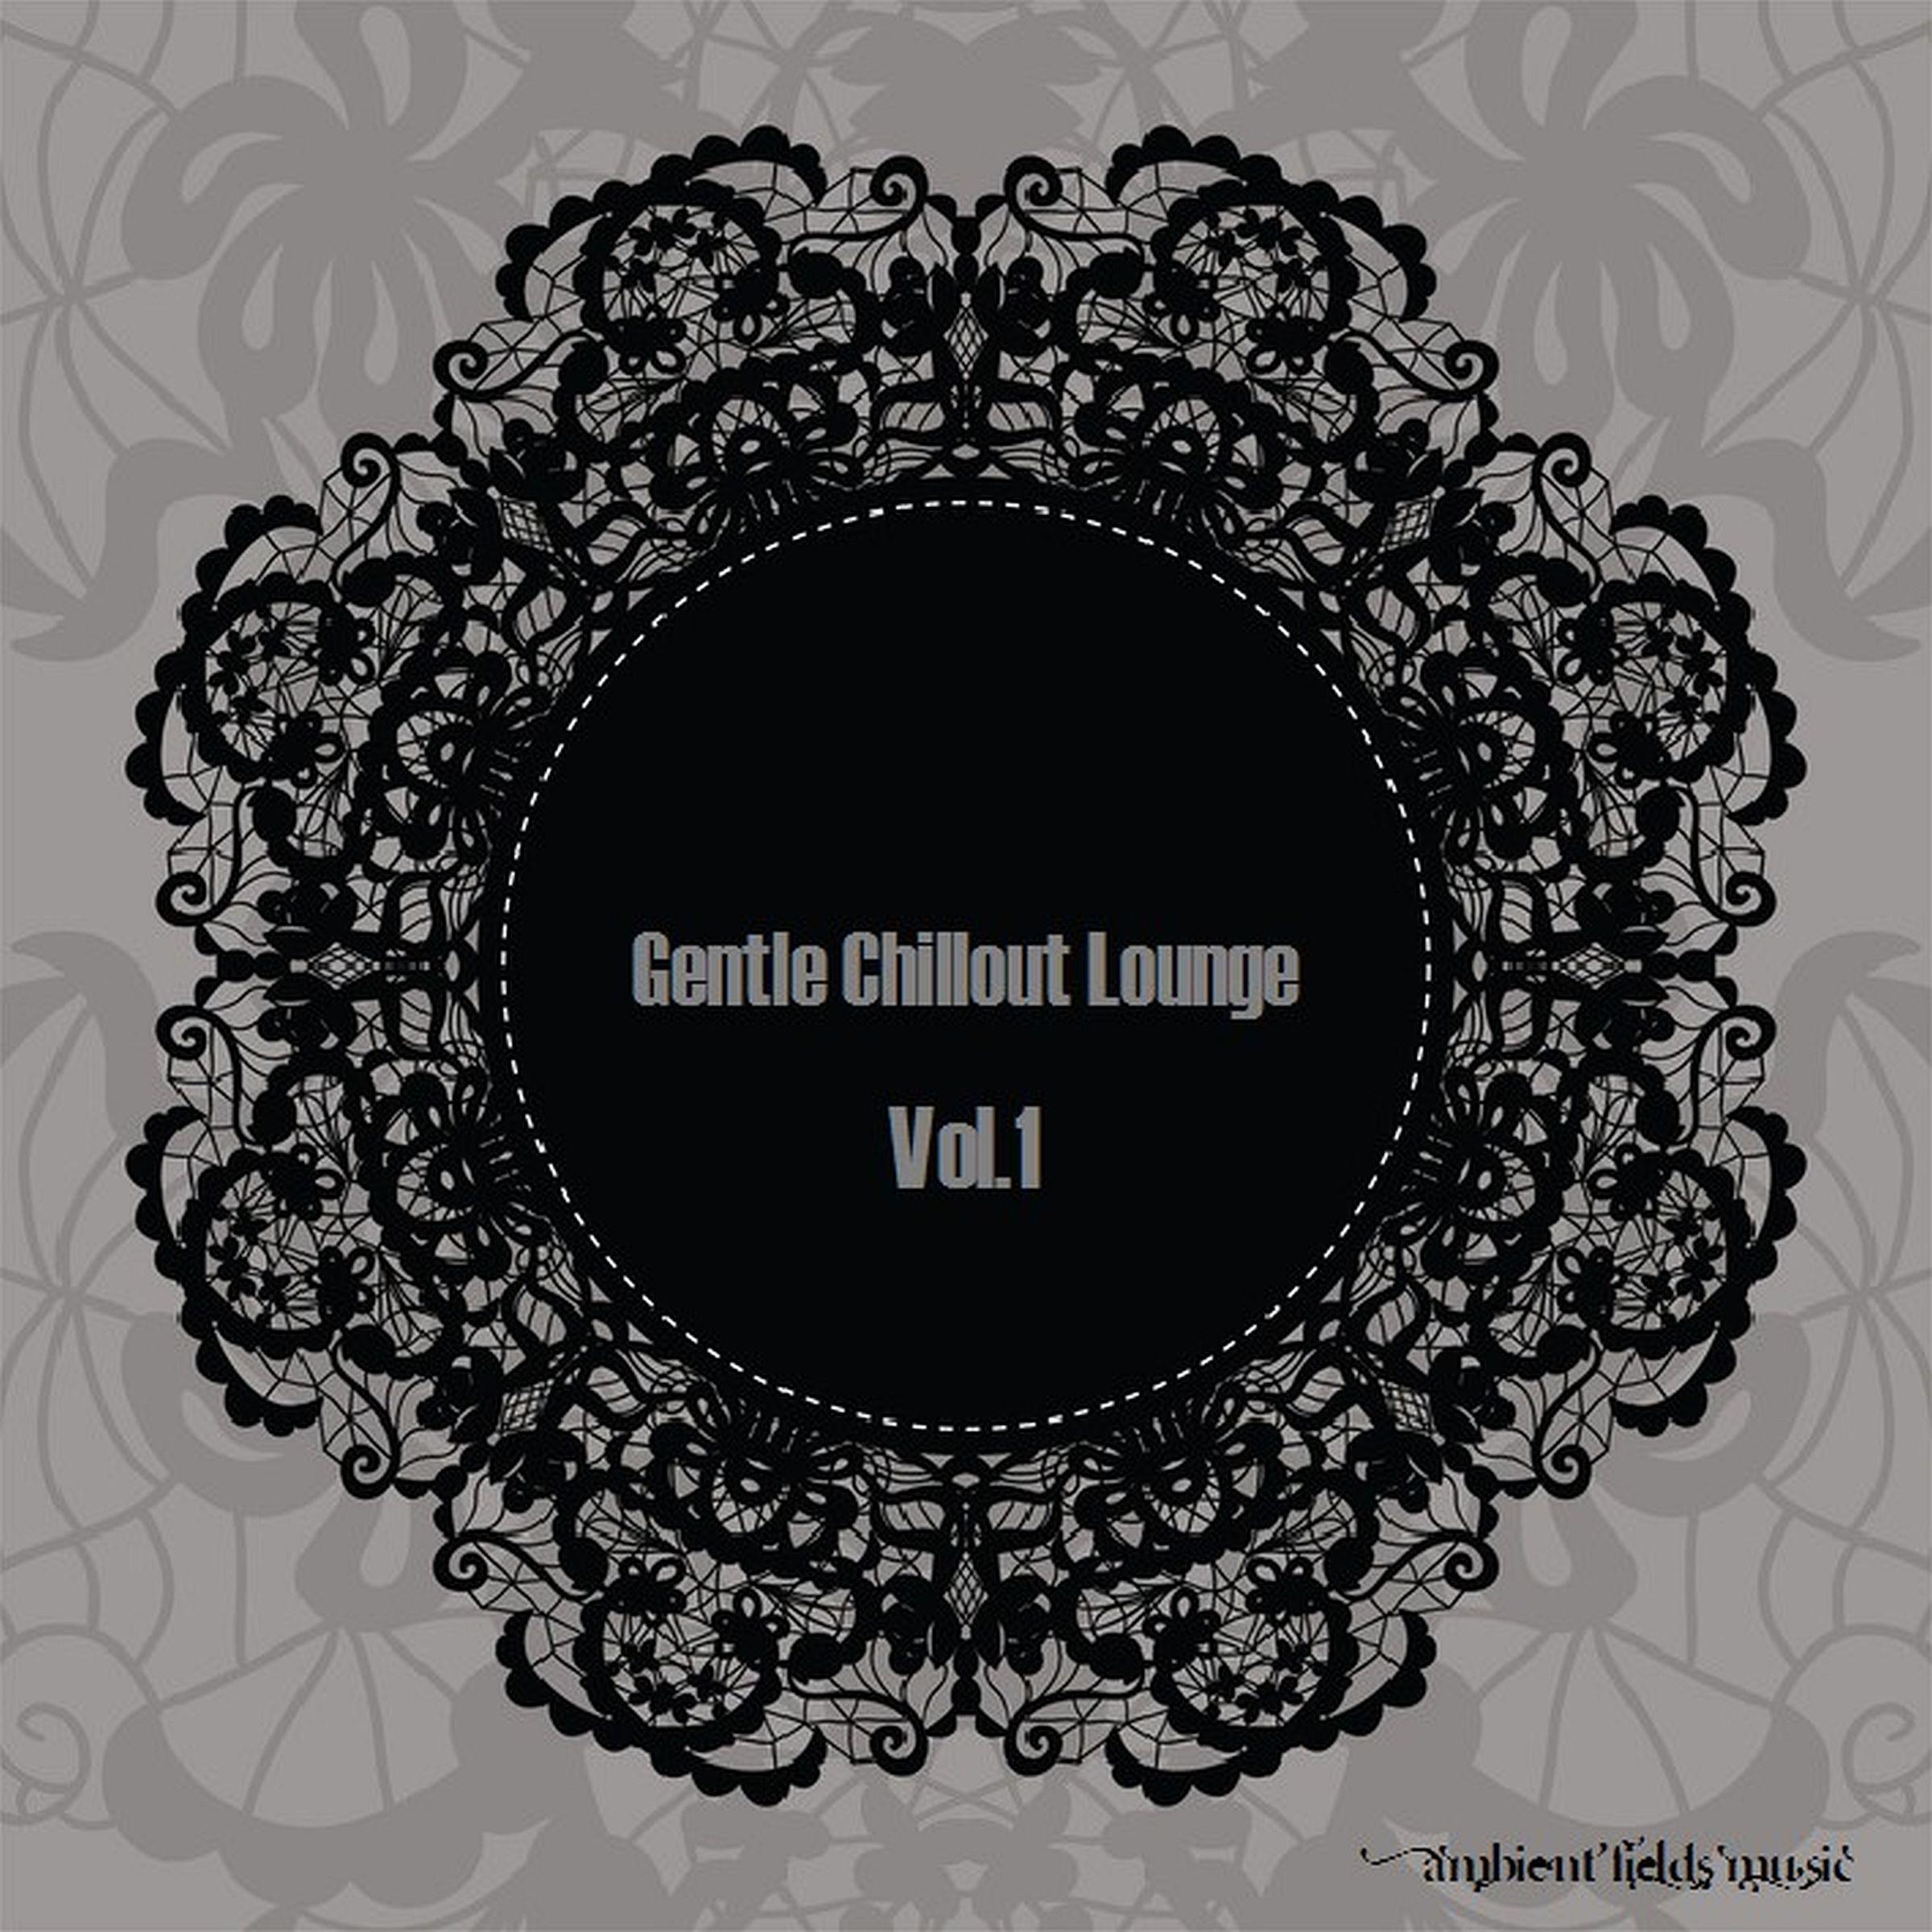 Gentle Chillout Lounge, Vol. 1